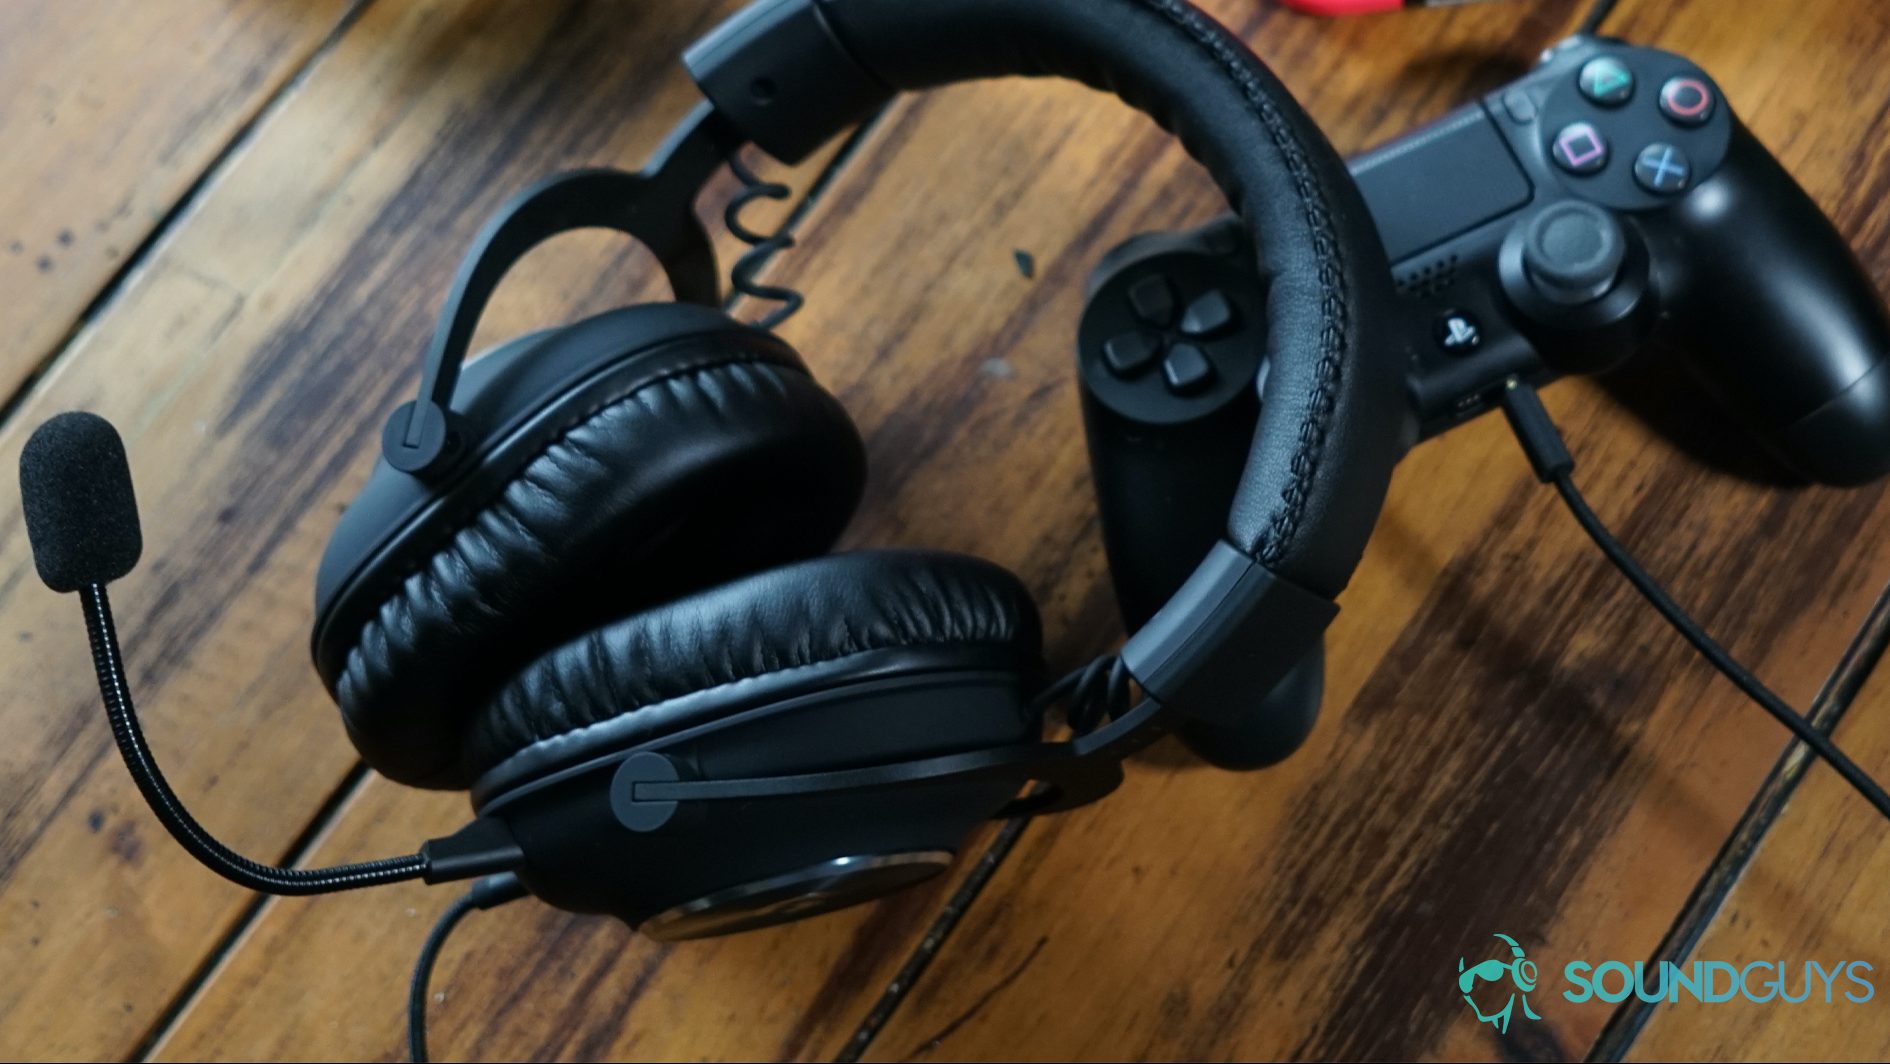 Best PS4 headset for gaming: What should you pick? - SoundGuys